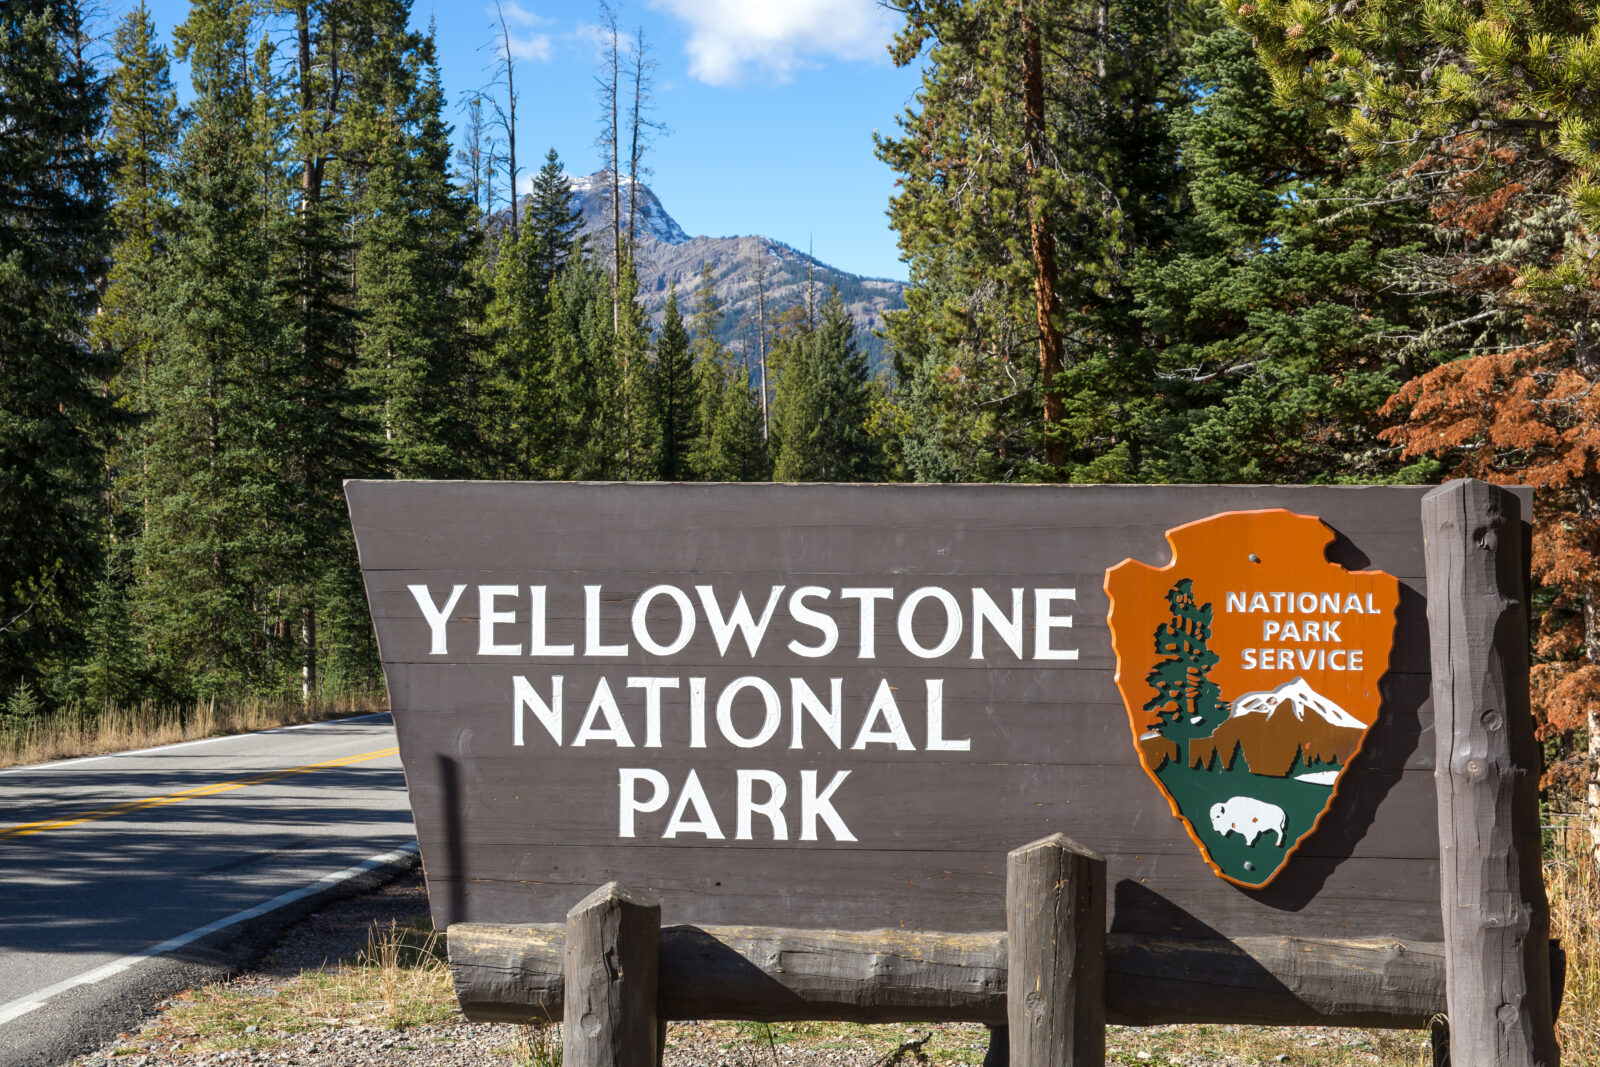 Yellowstone national park entrance sign